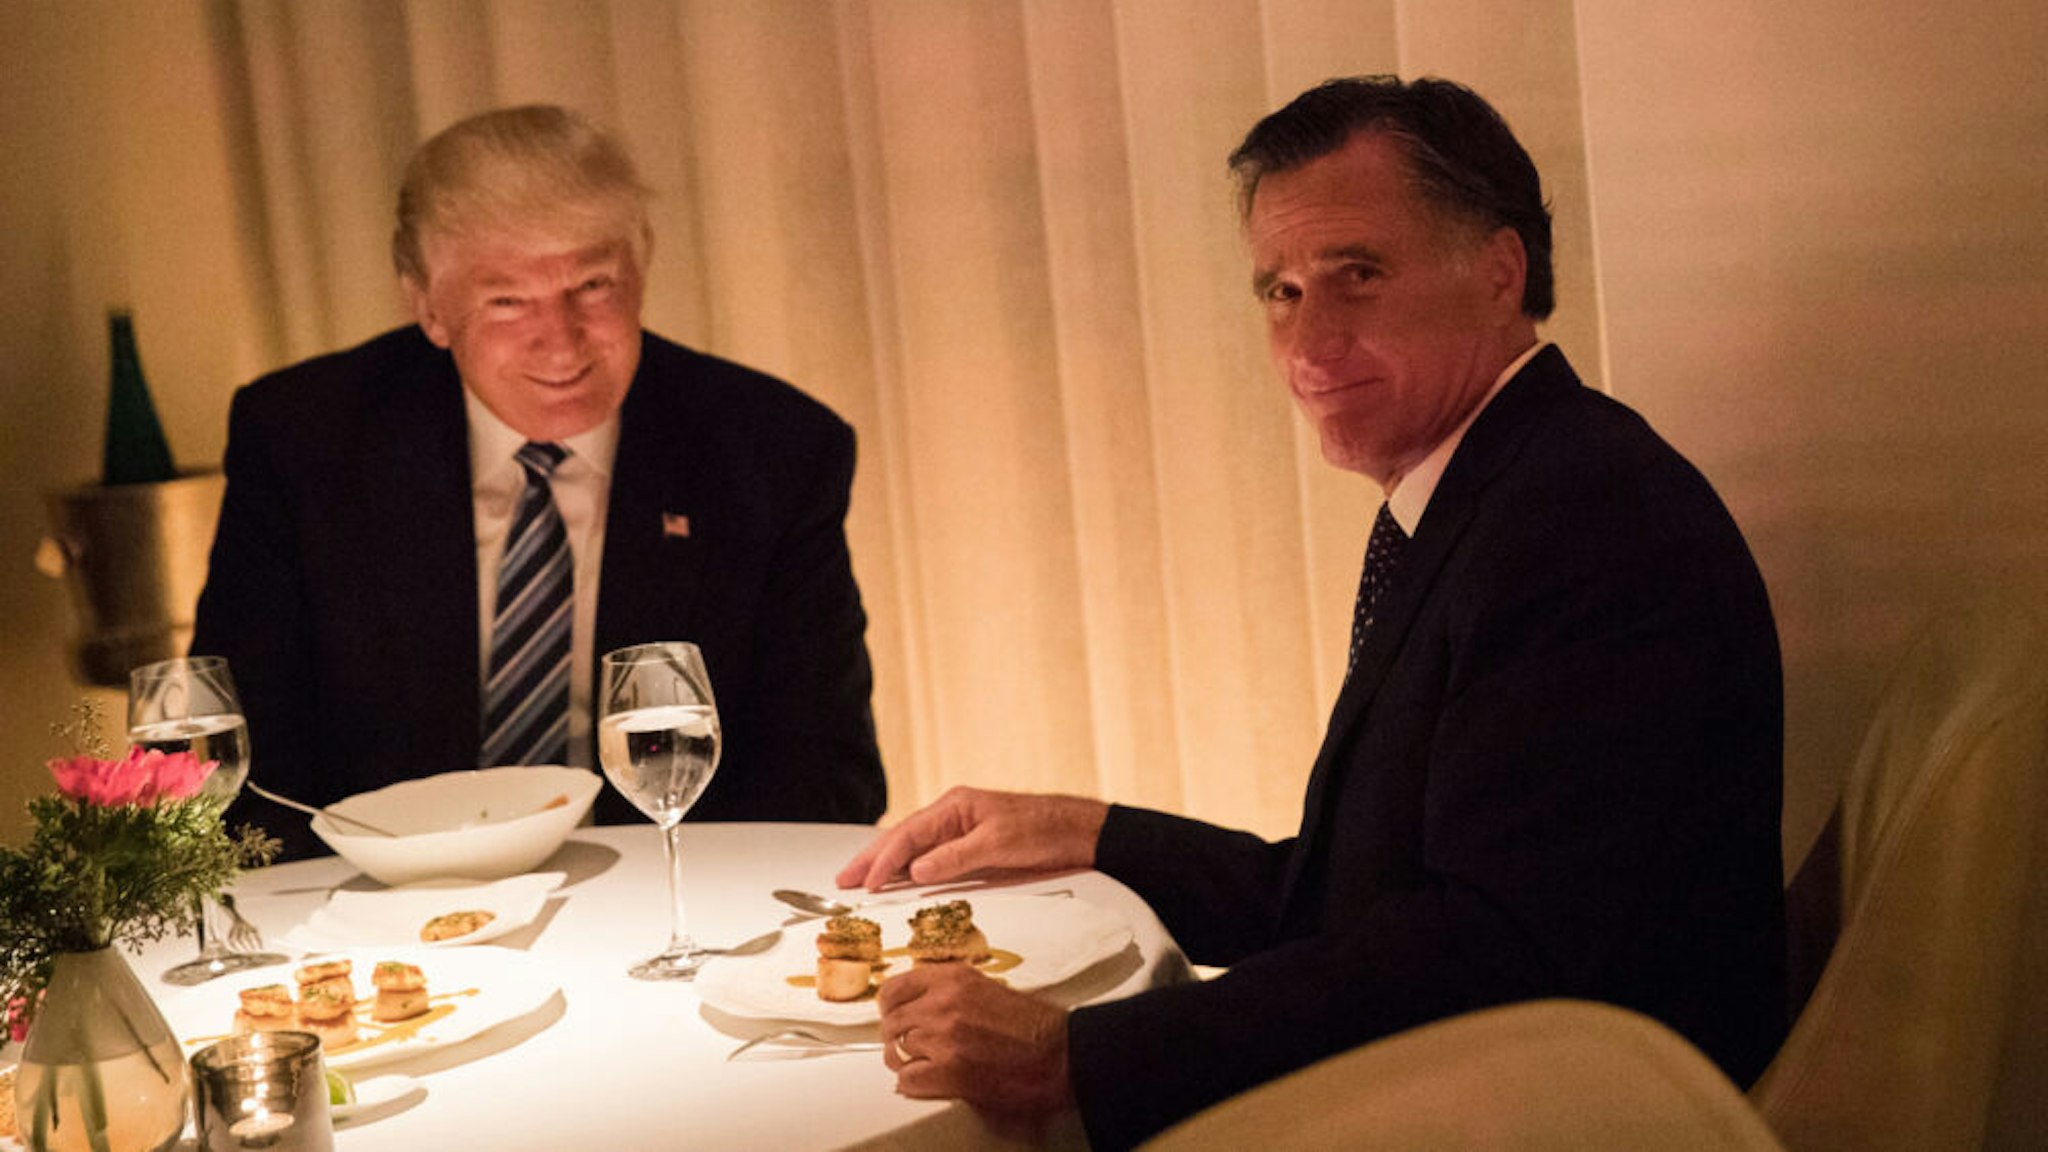 NEW YORK, NY - NOVEMBER 29: (L to R) President-elect Donald Trump and Mitt Romney dine at Jean Georges restaurant, November 29, 2016 in New York City. President-elect Donald Trump and his transition team are in the process of filling cabinet and other high level positions for the new administration.